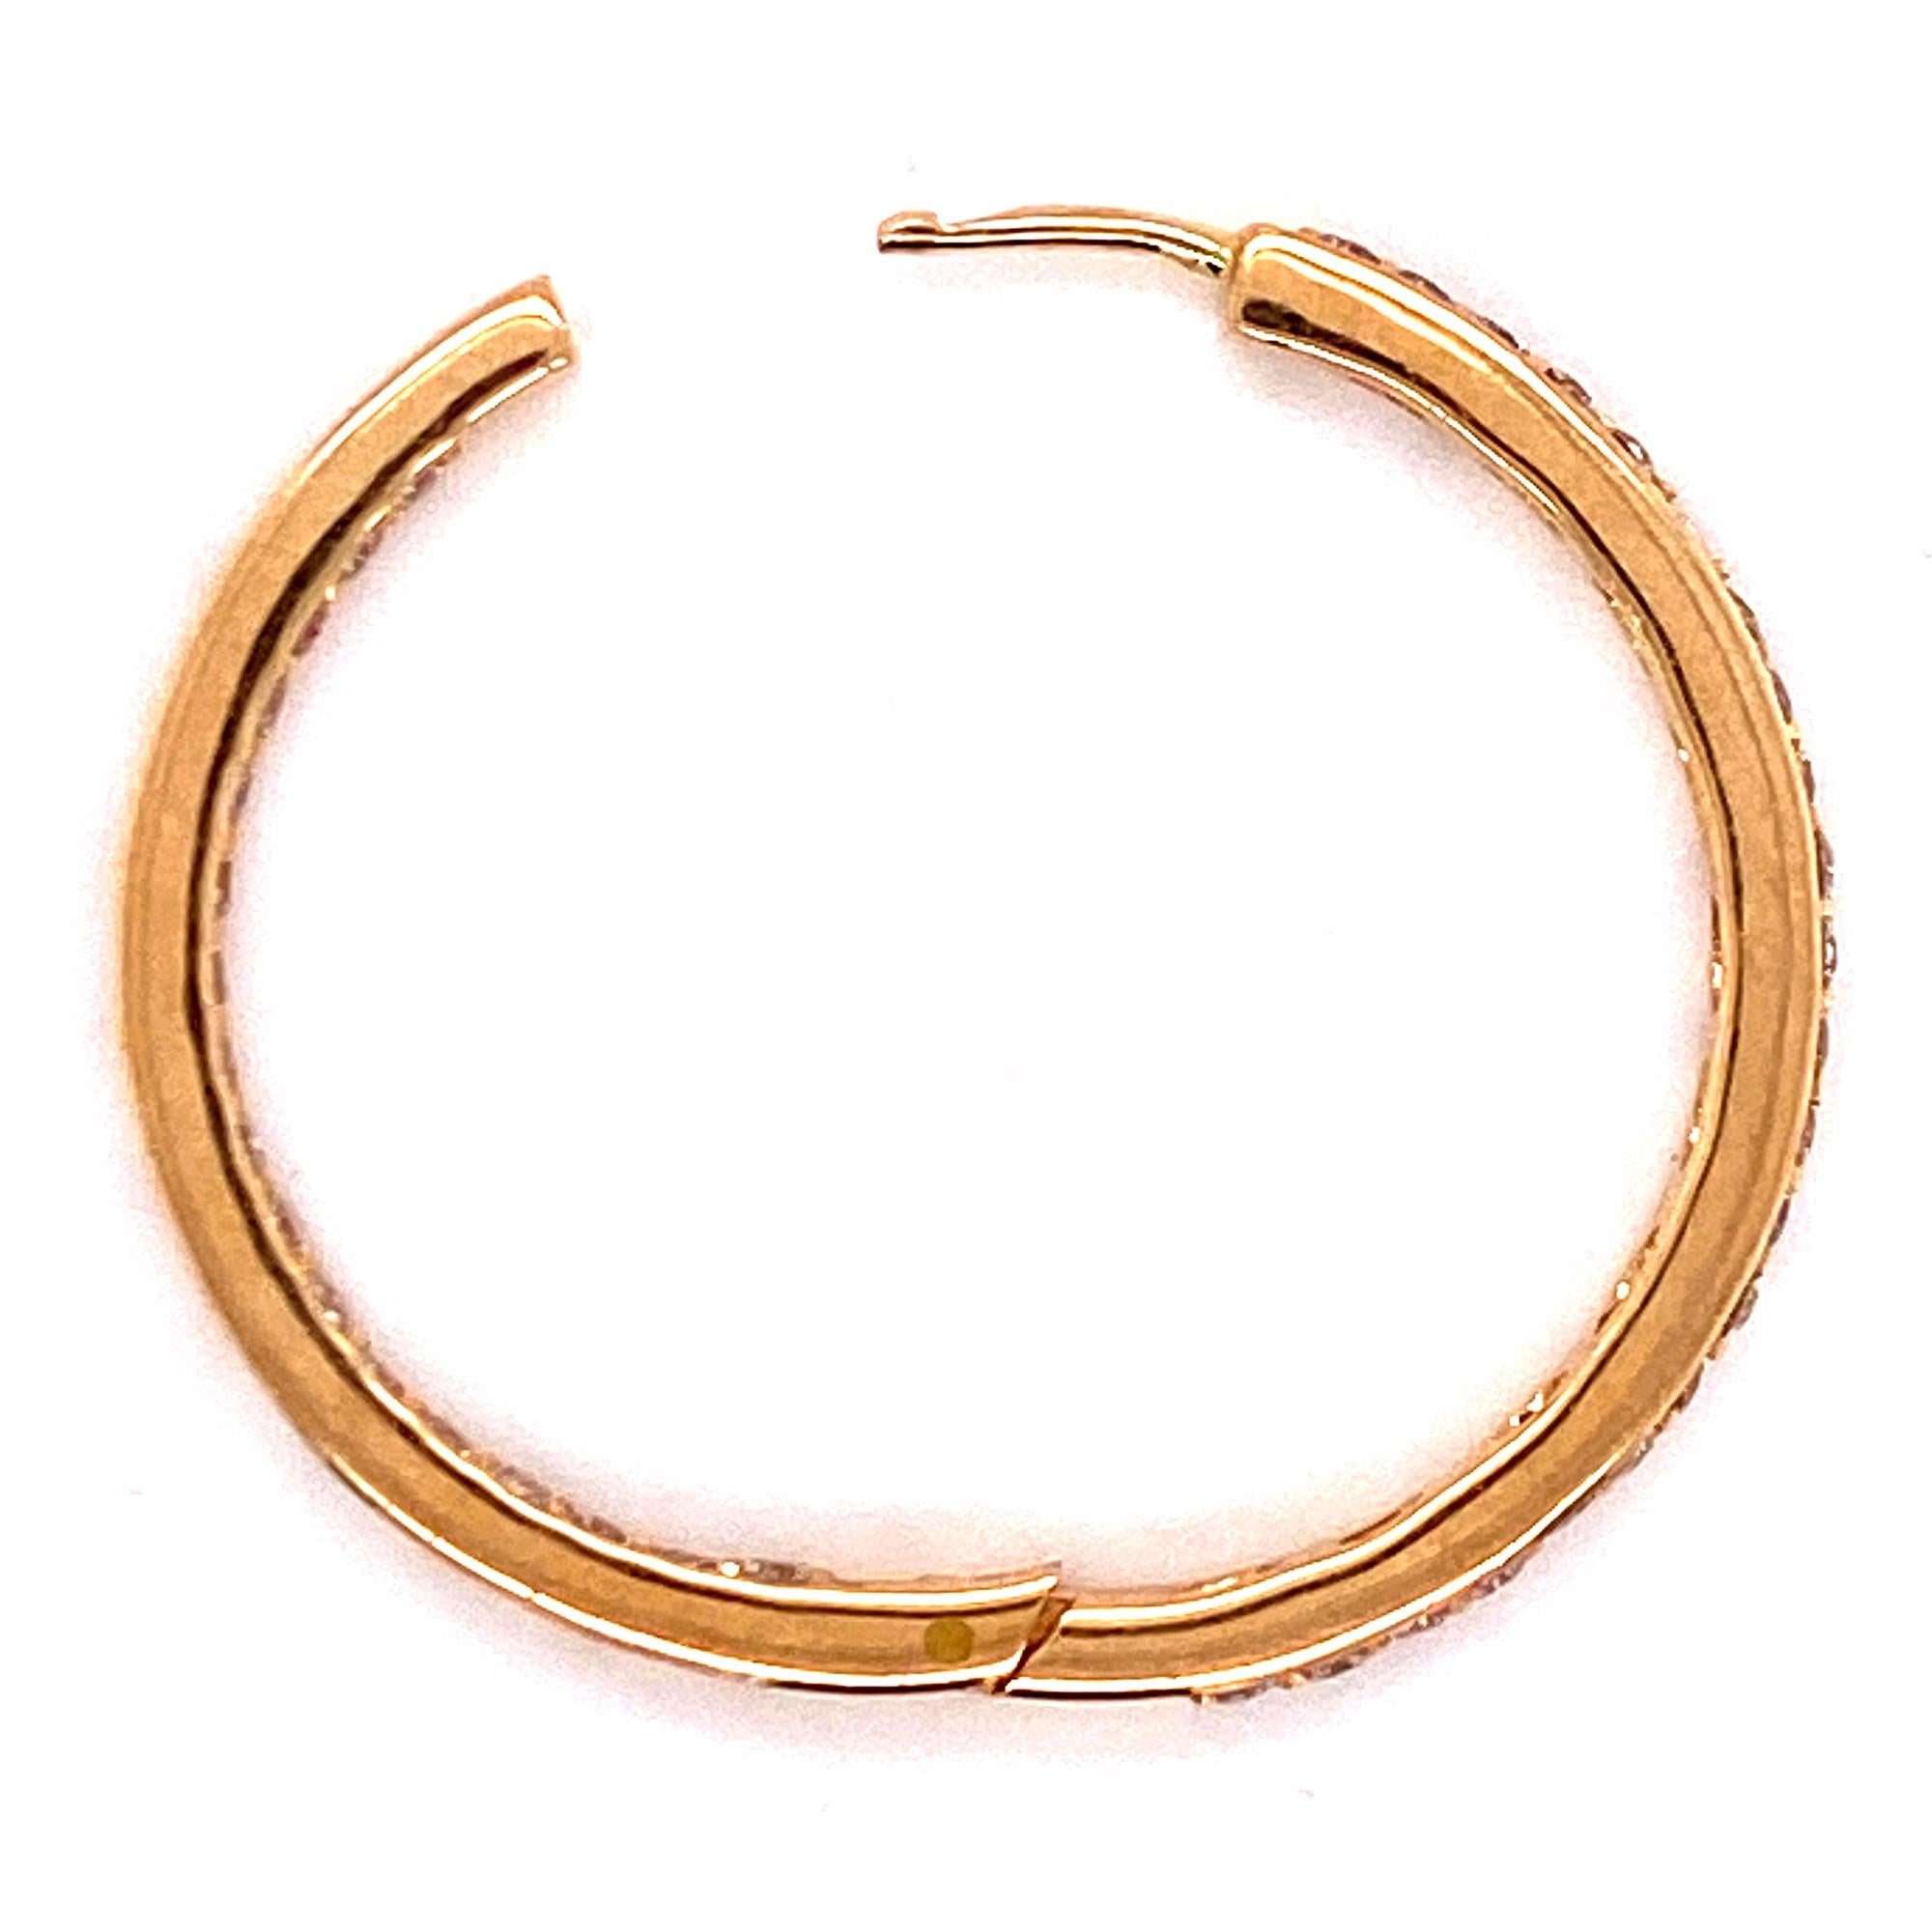 Diamond In and Out Hoop Earrings 14 Karat Yellow Gold In Excellent Condition For Sale In Boca Raton, FL